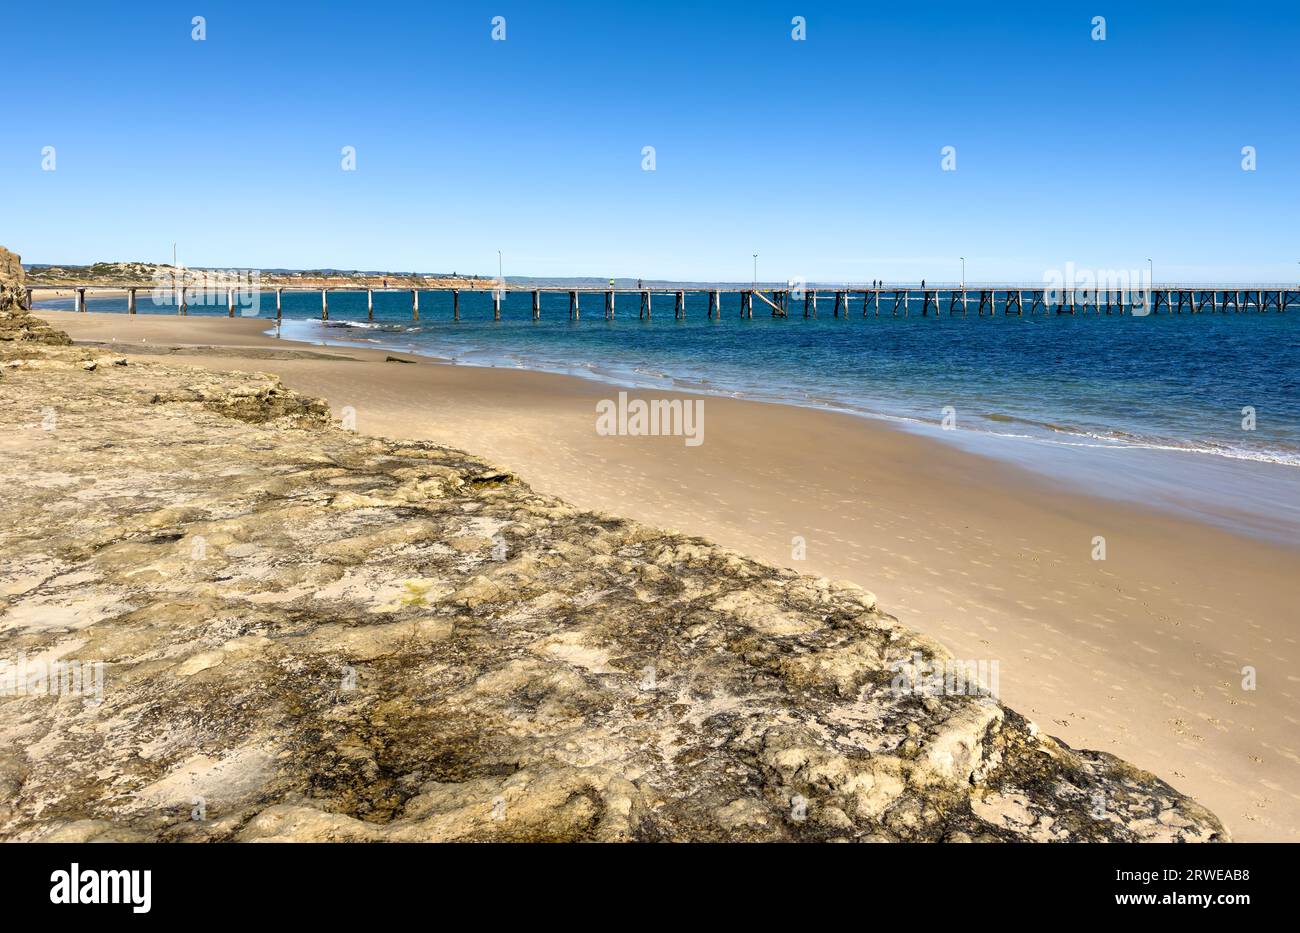 Beautiful Port Noarlunga Beach with wooden jetty in Adelaide, South Australia. Stock Photo